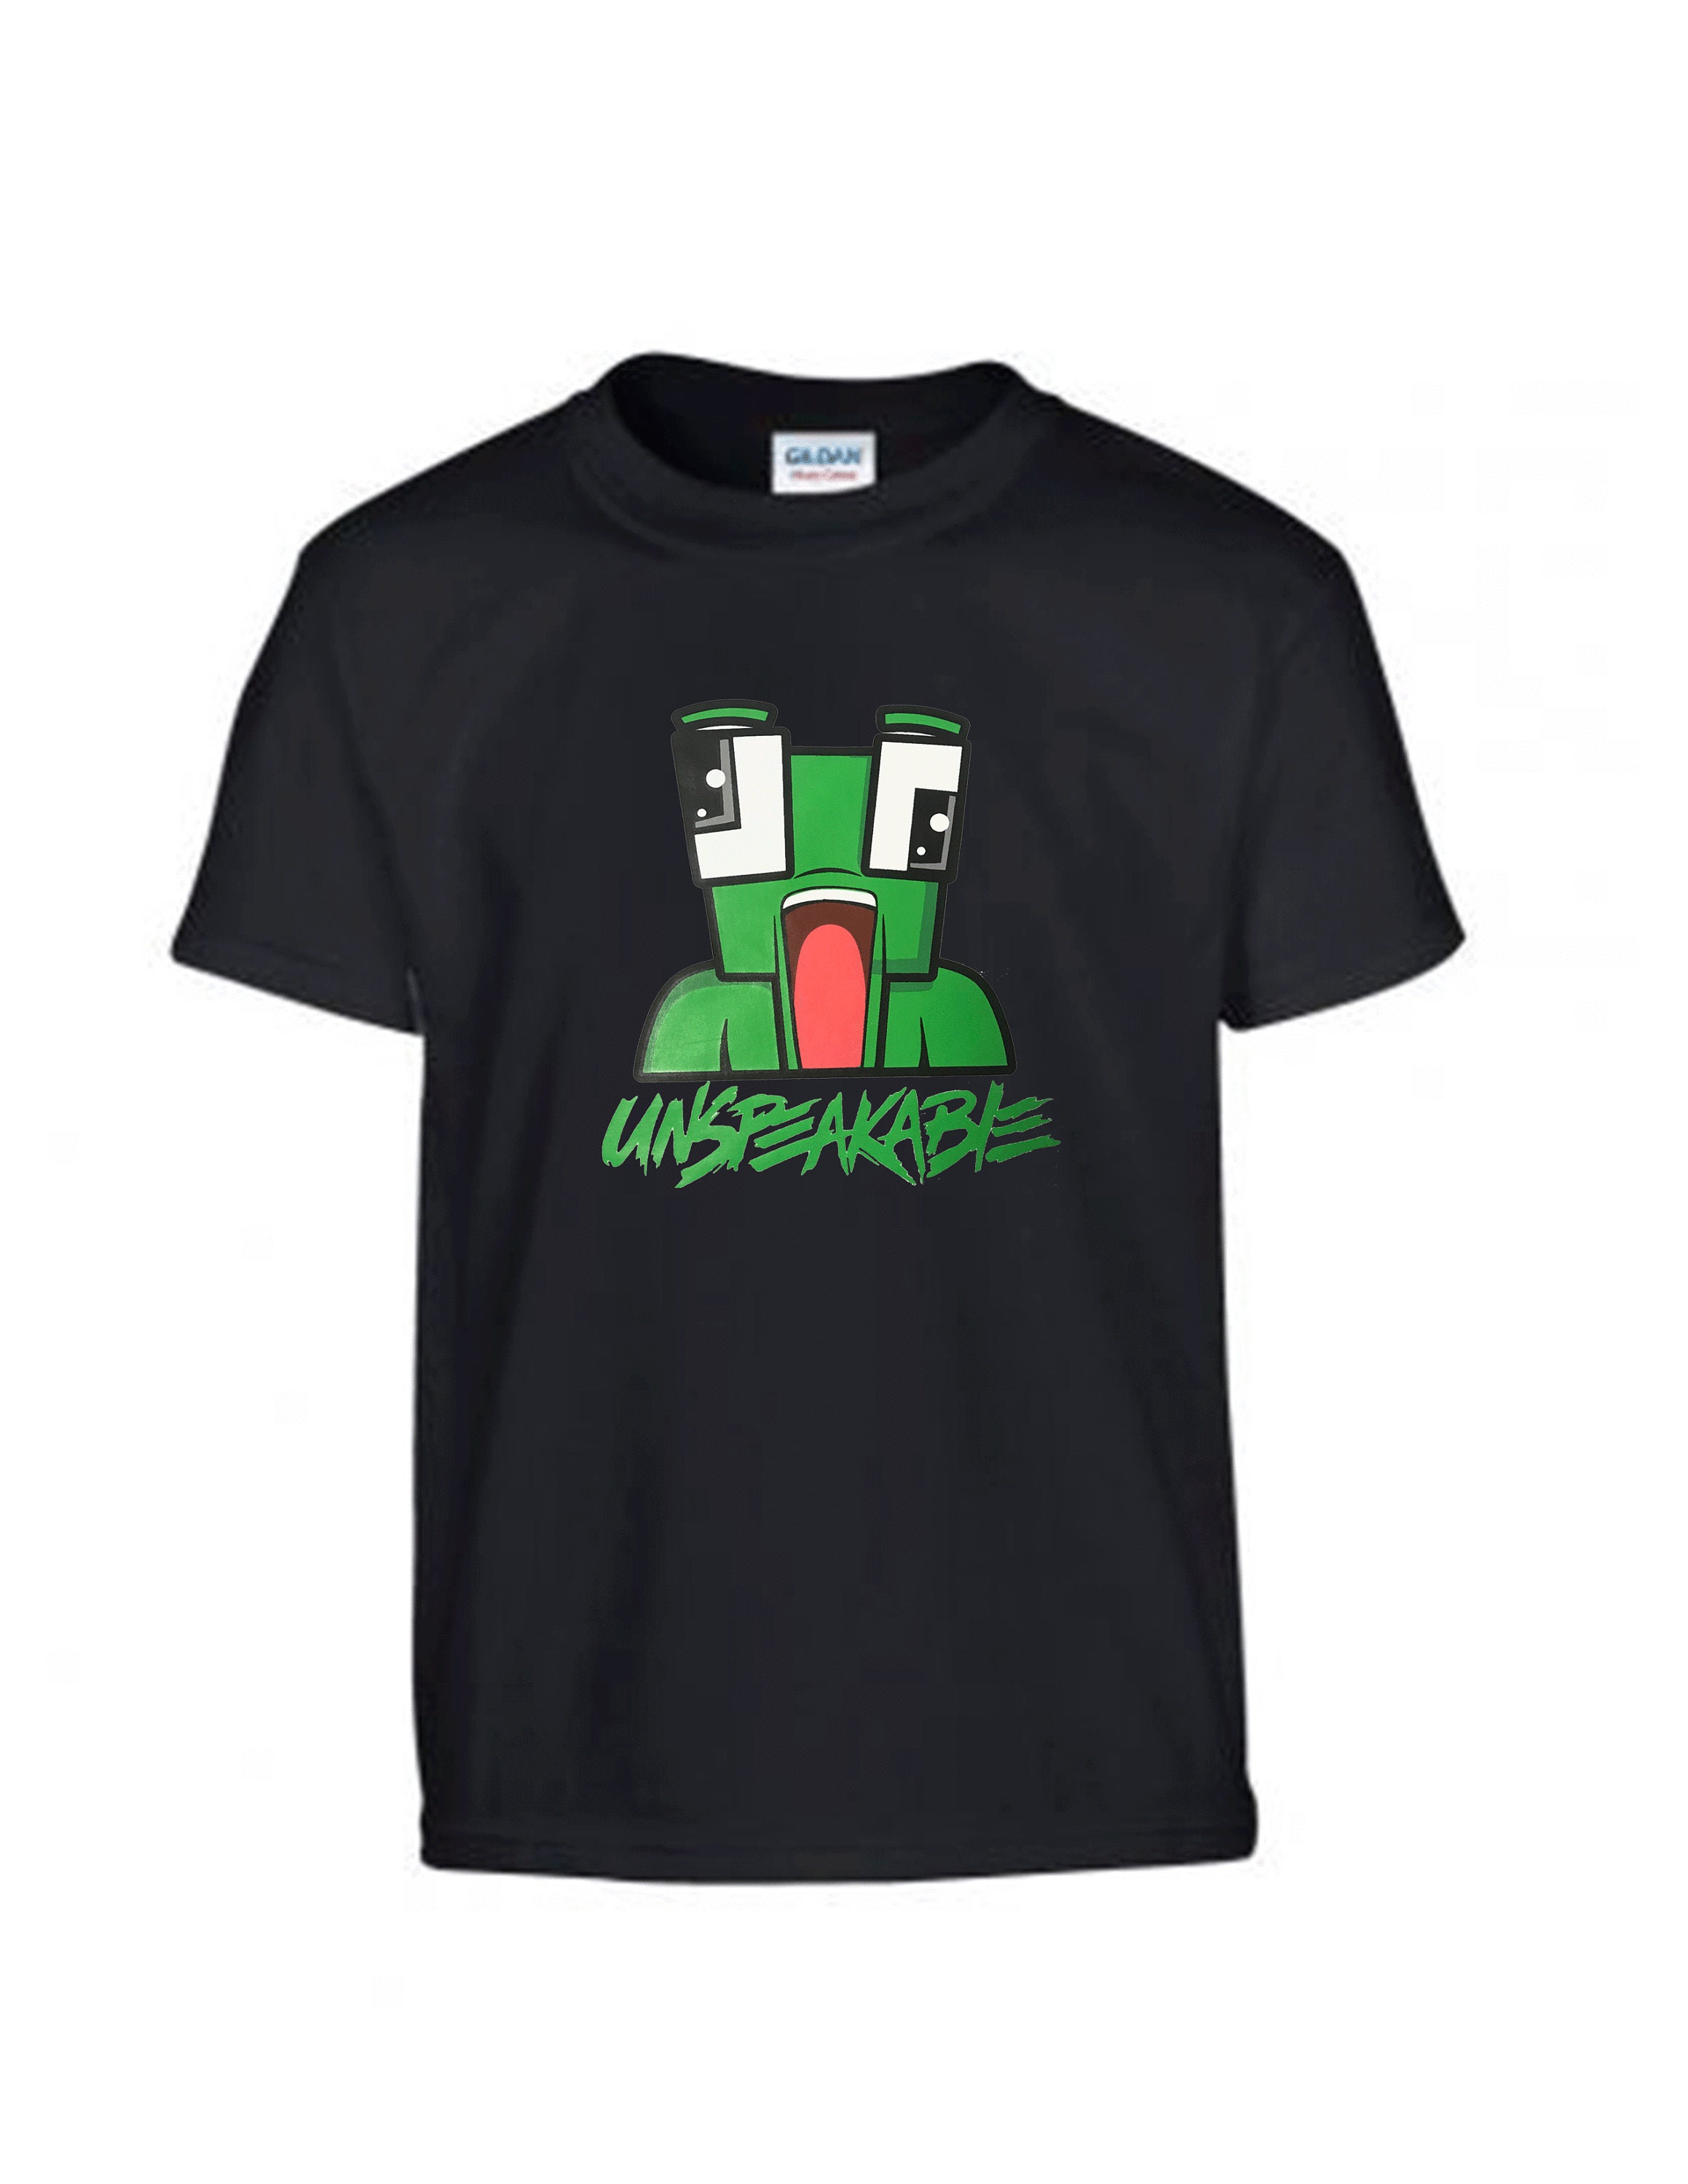 Discover Unspeakable with Icon T-shirt